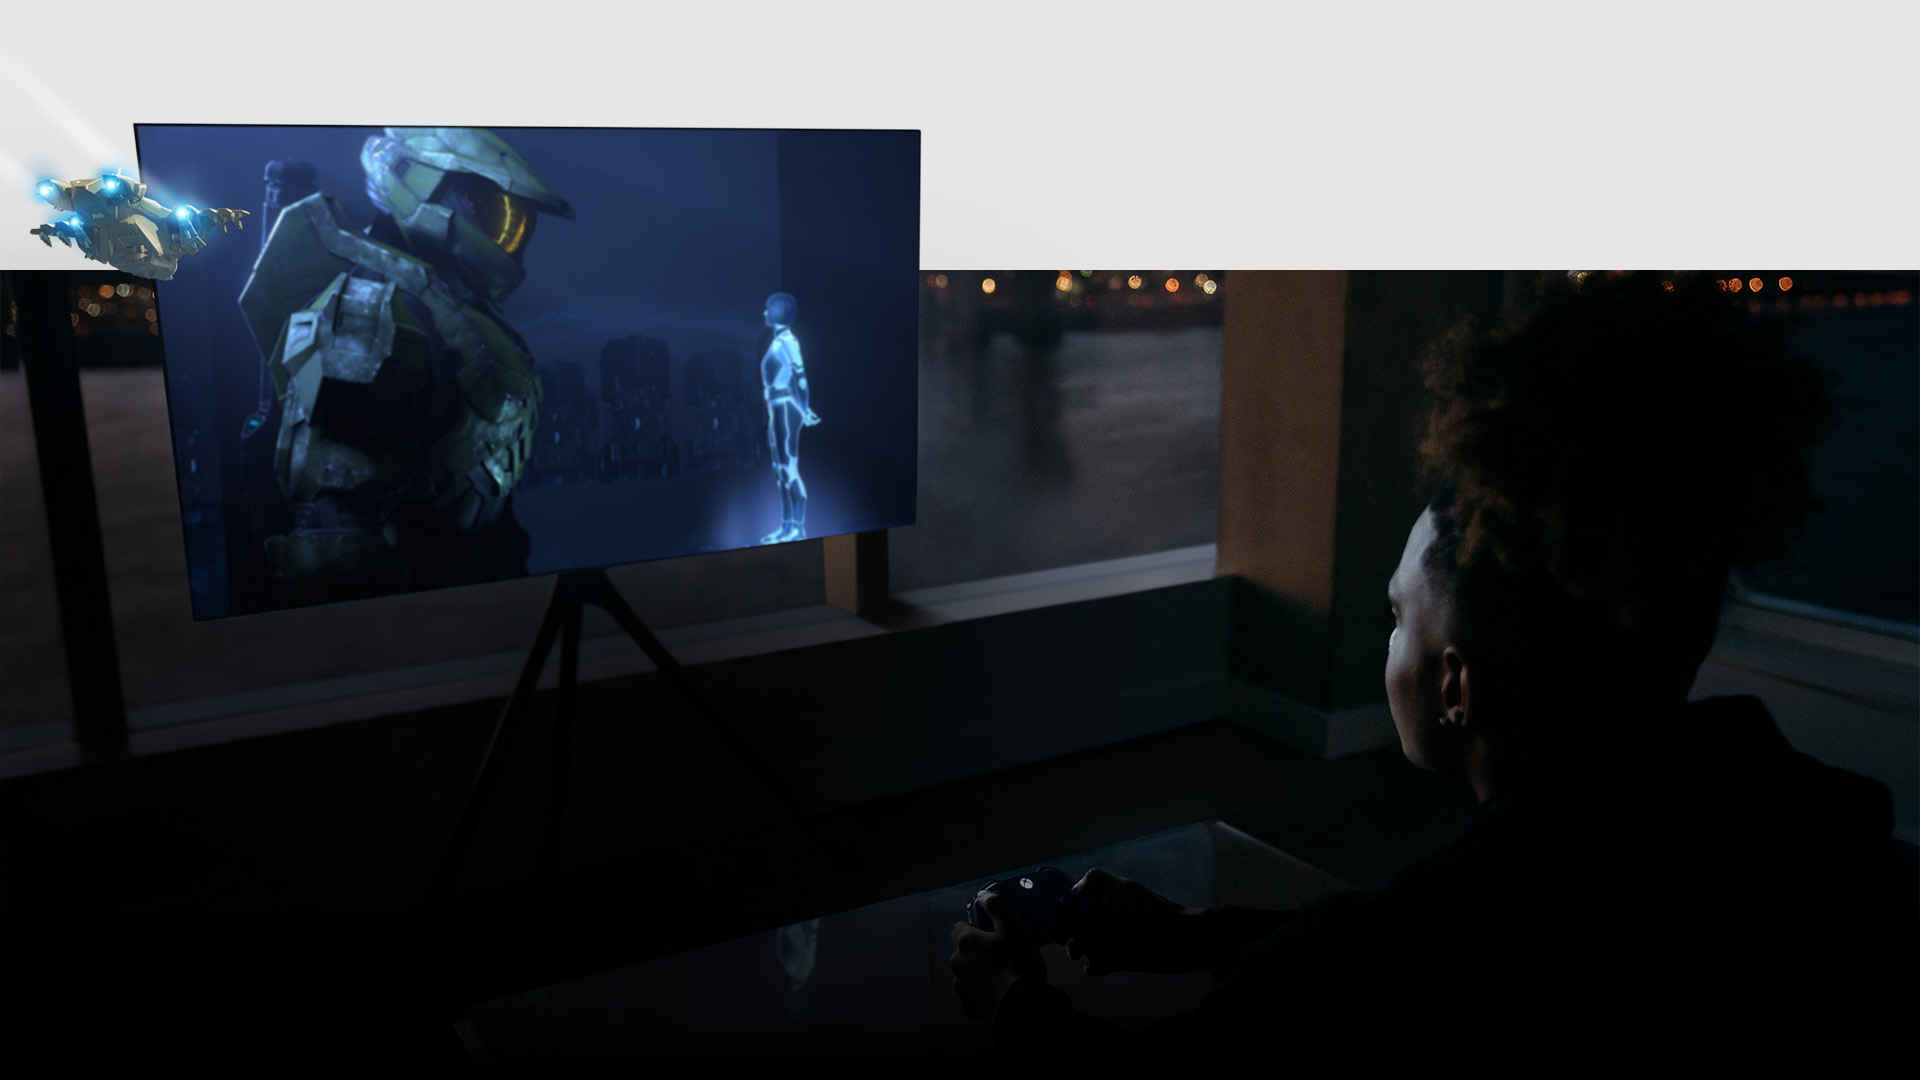 Player uses controller in living room while Halo Infinite gameplay plays on Samsung TV